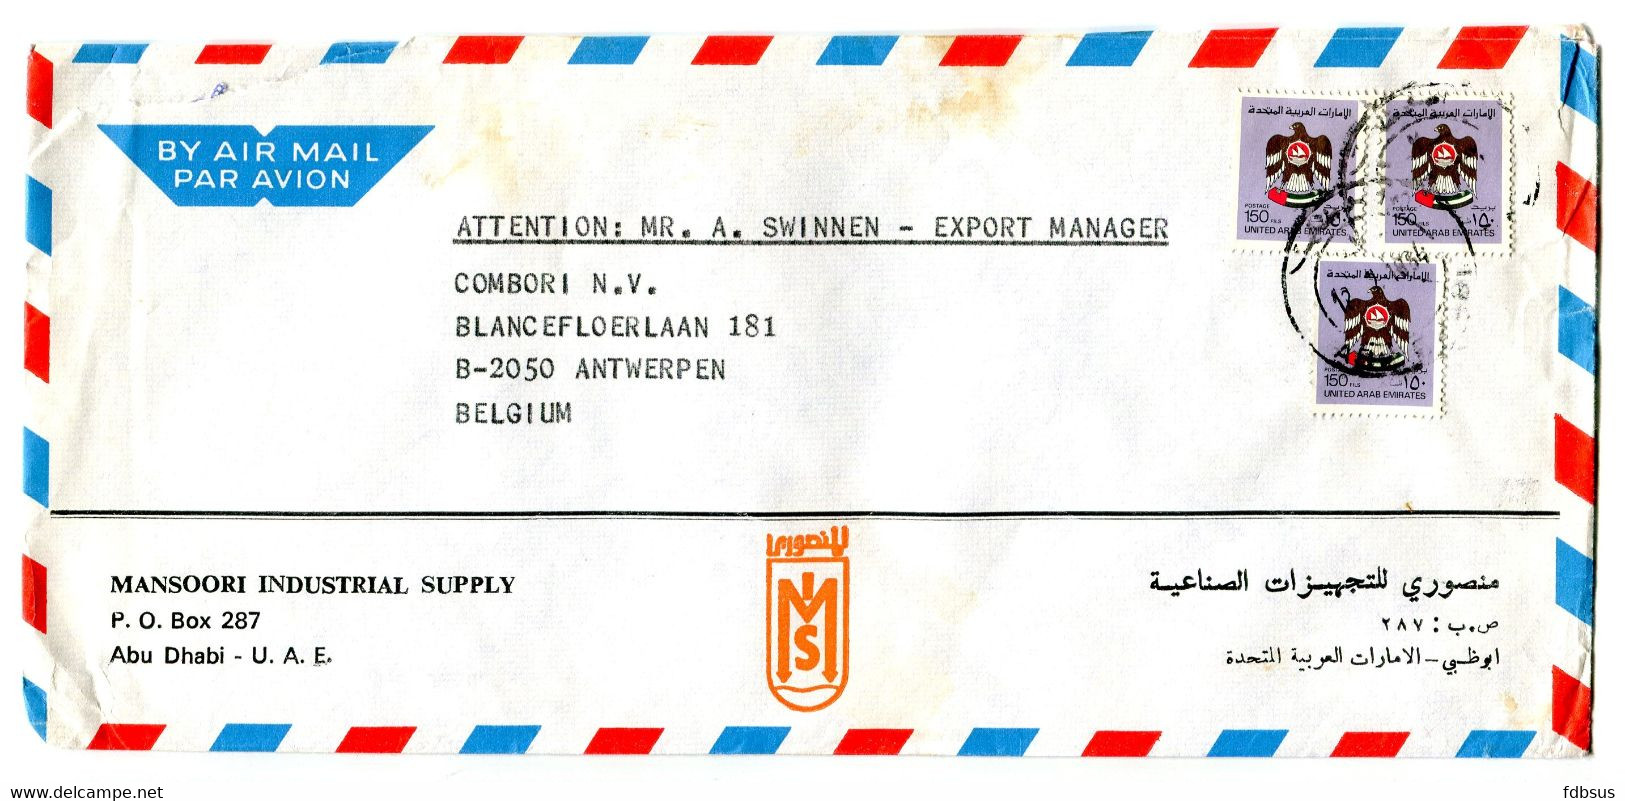 Airmail Cover From MIS MANSOORI INDUSTRIAL SUPPLY To Belgium - See Scan For Stamp (s) And Cancellations - Abu Dhabi